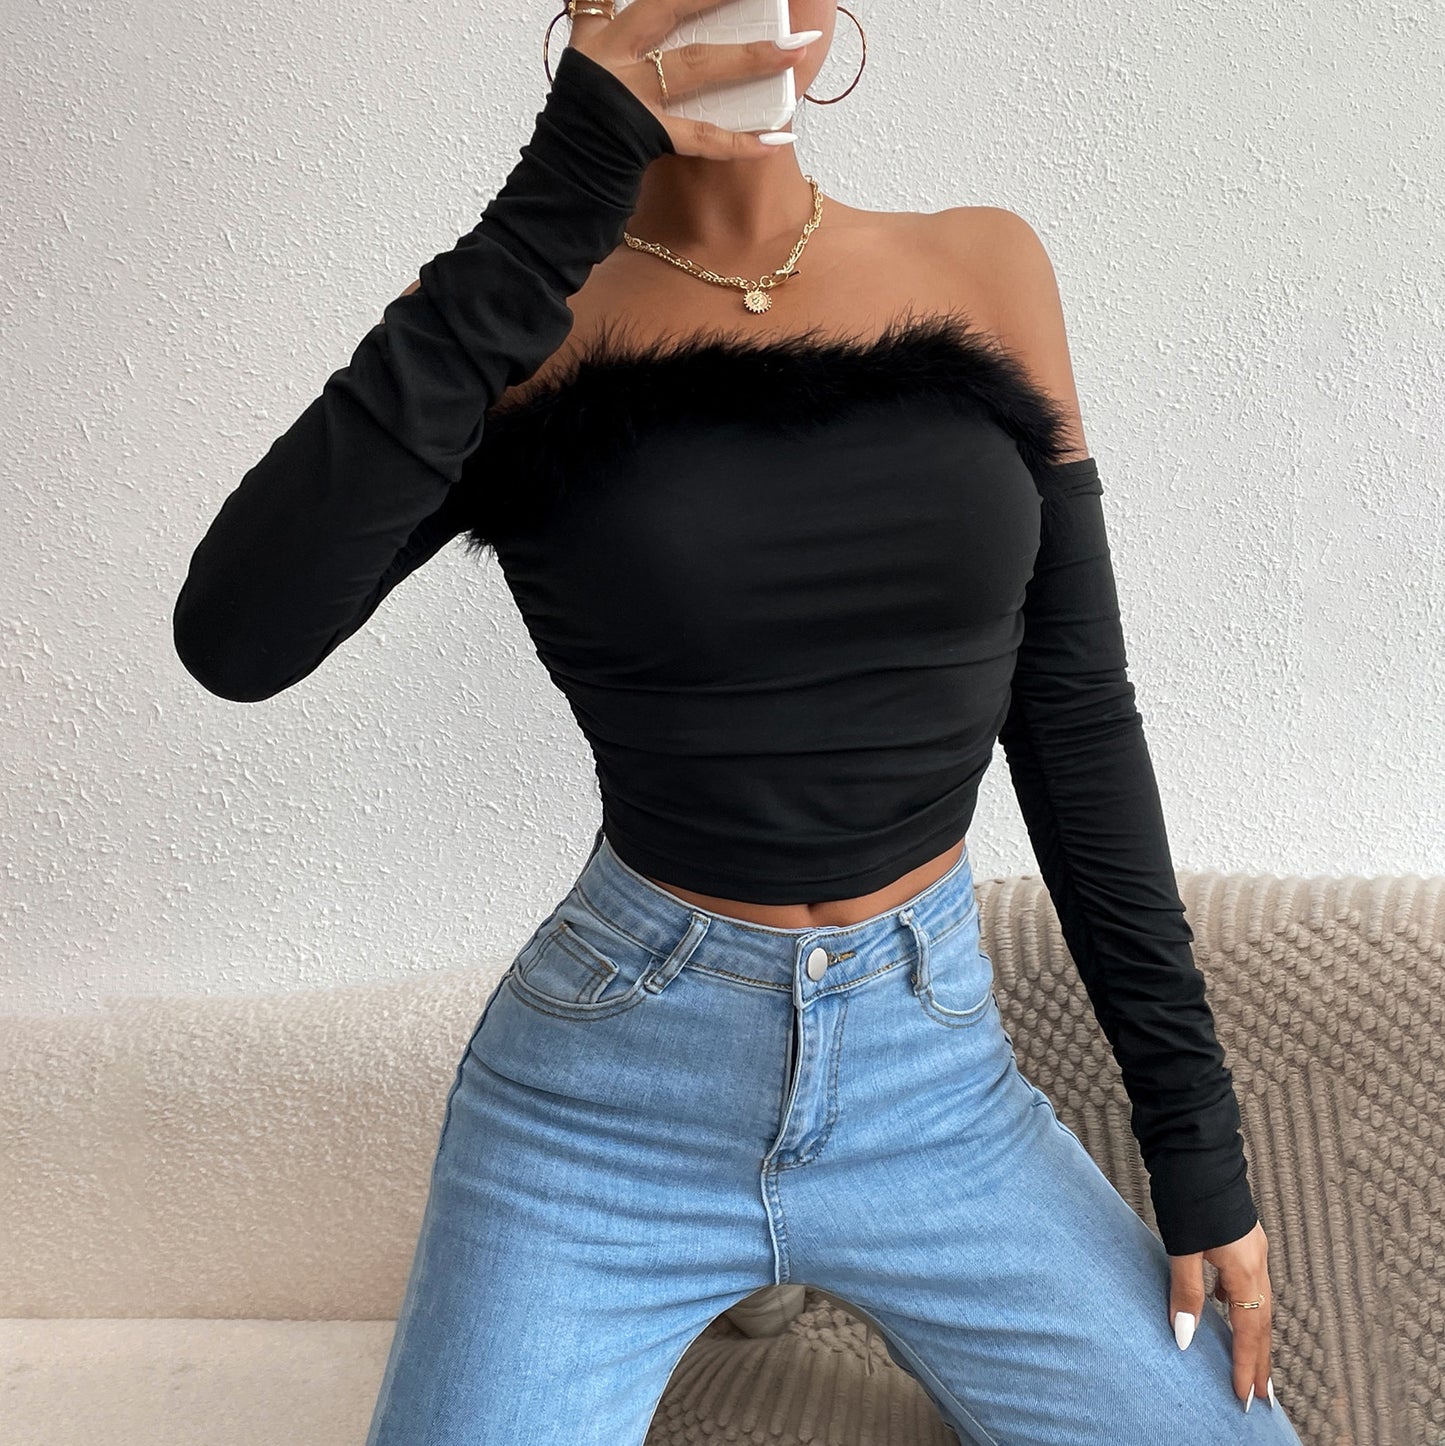 Summer long-sleeved top, straight neck, backless and off-the-shoulder top